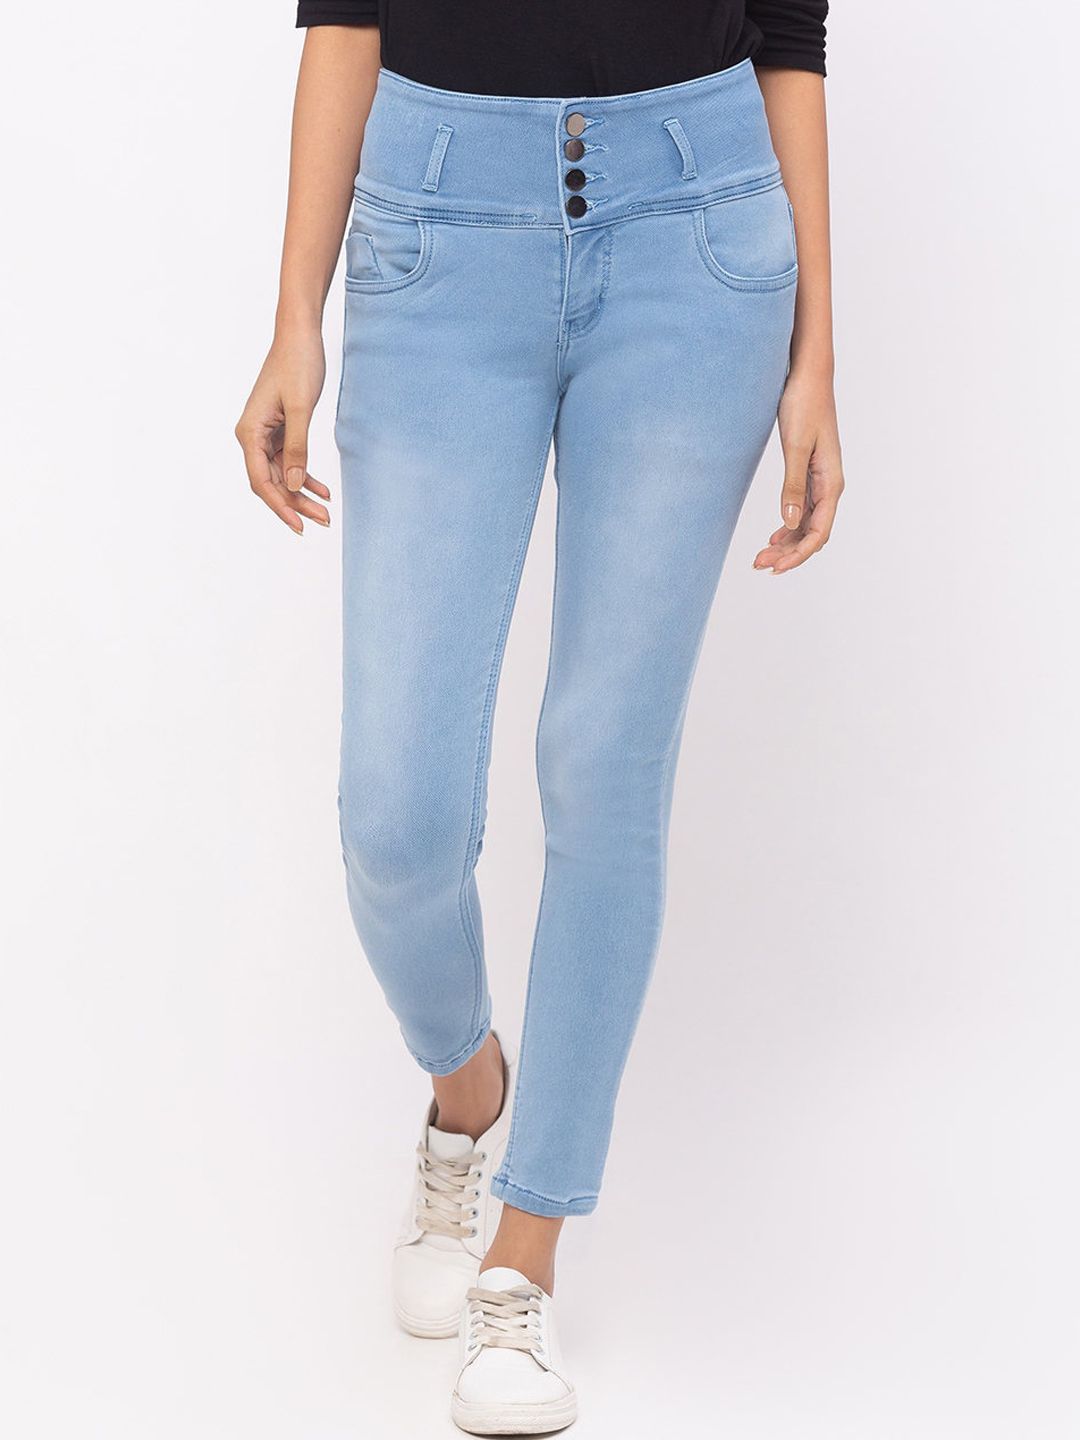 ZOLA Women Blue Slim Fit Light Fade Ankle-Length Jeans Price in India